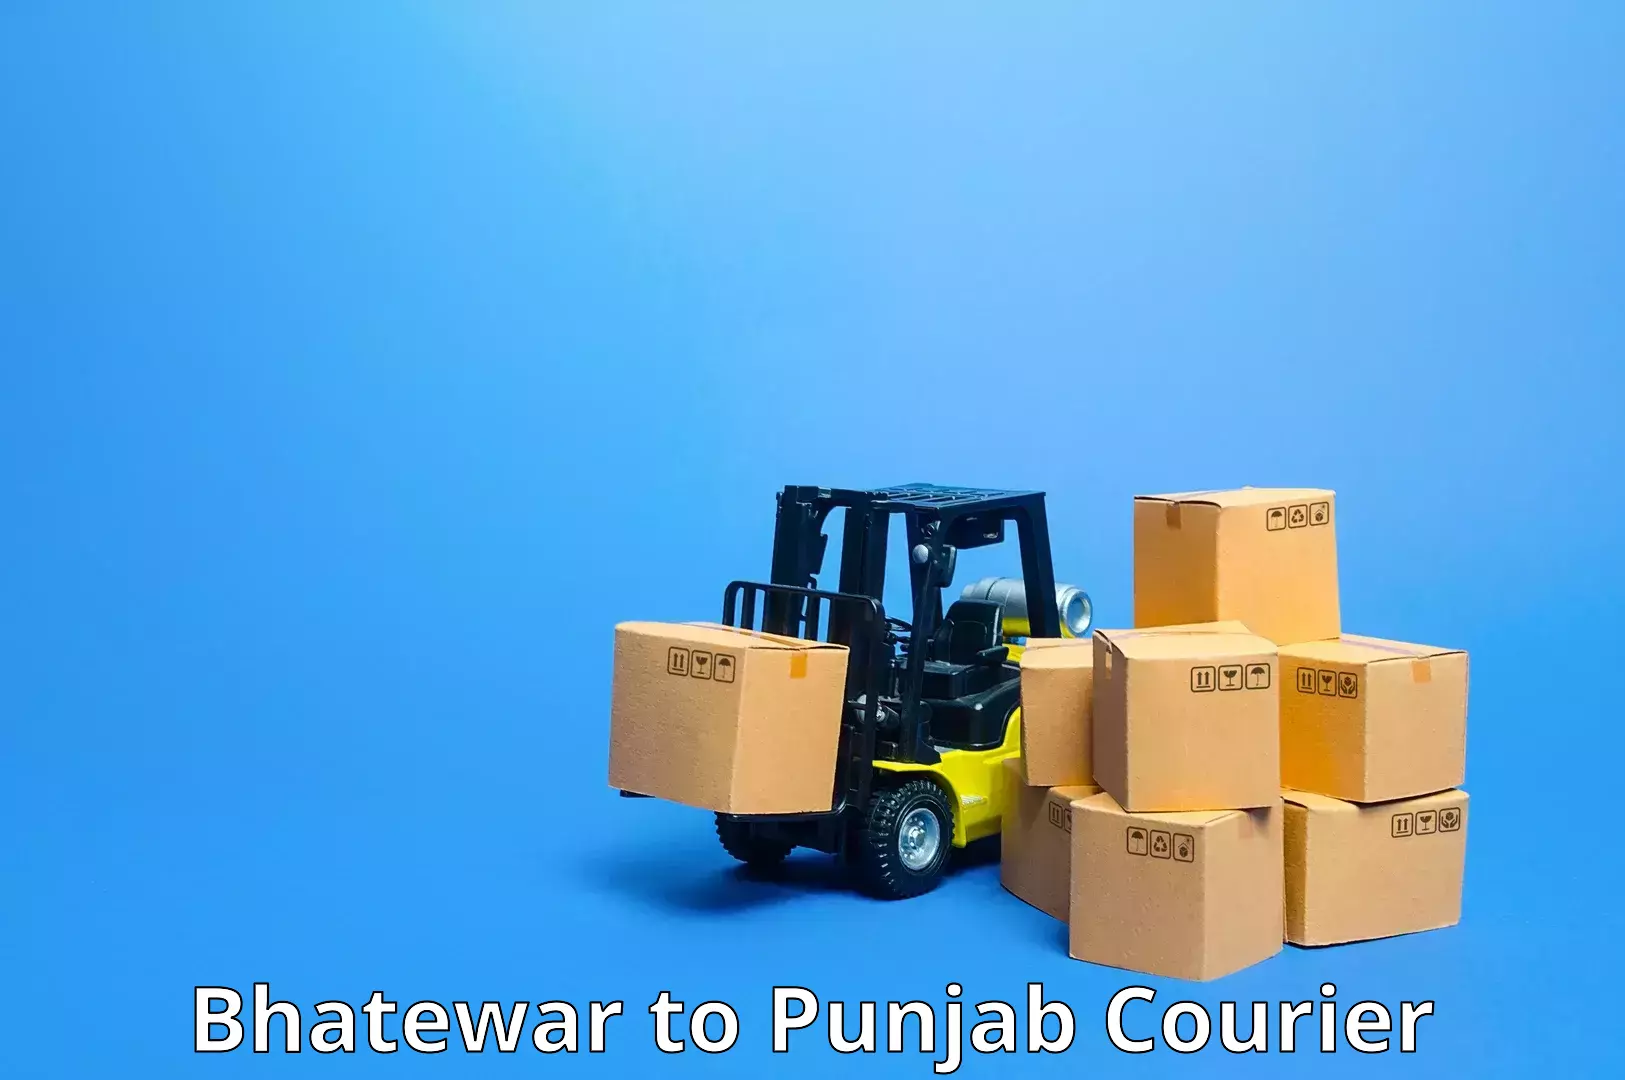 Multi-city courier Bhatewar to Punjab